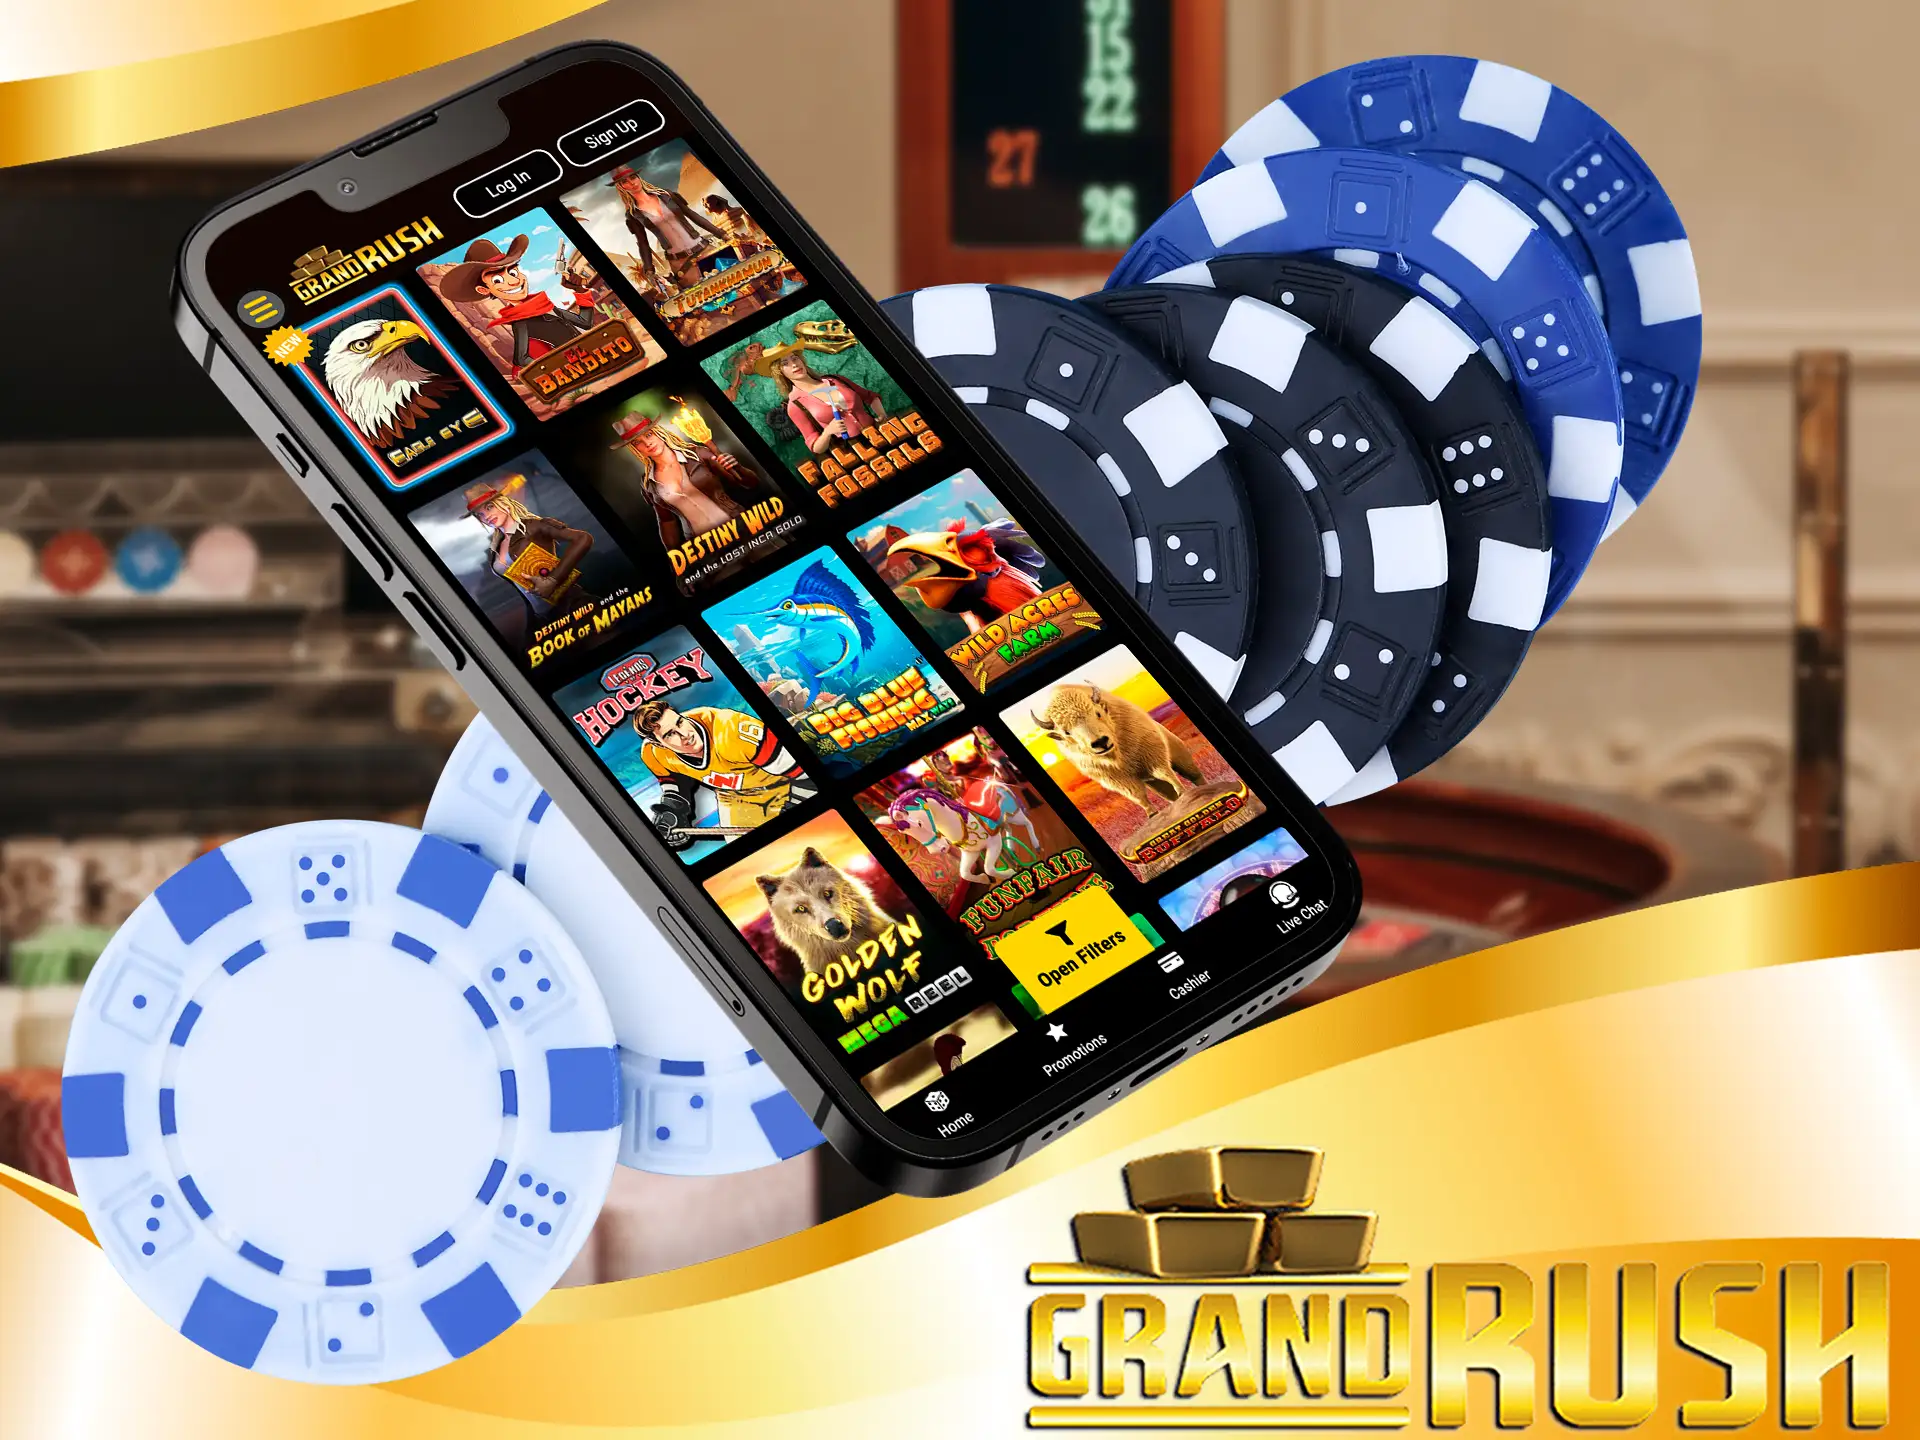 In Grand Rush mobile version you'll find any casino game you want.